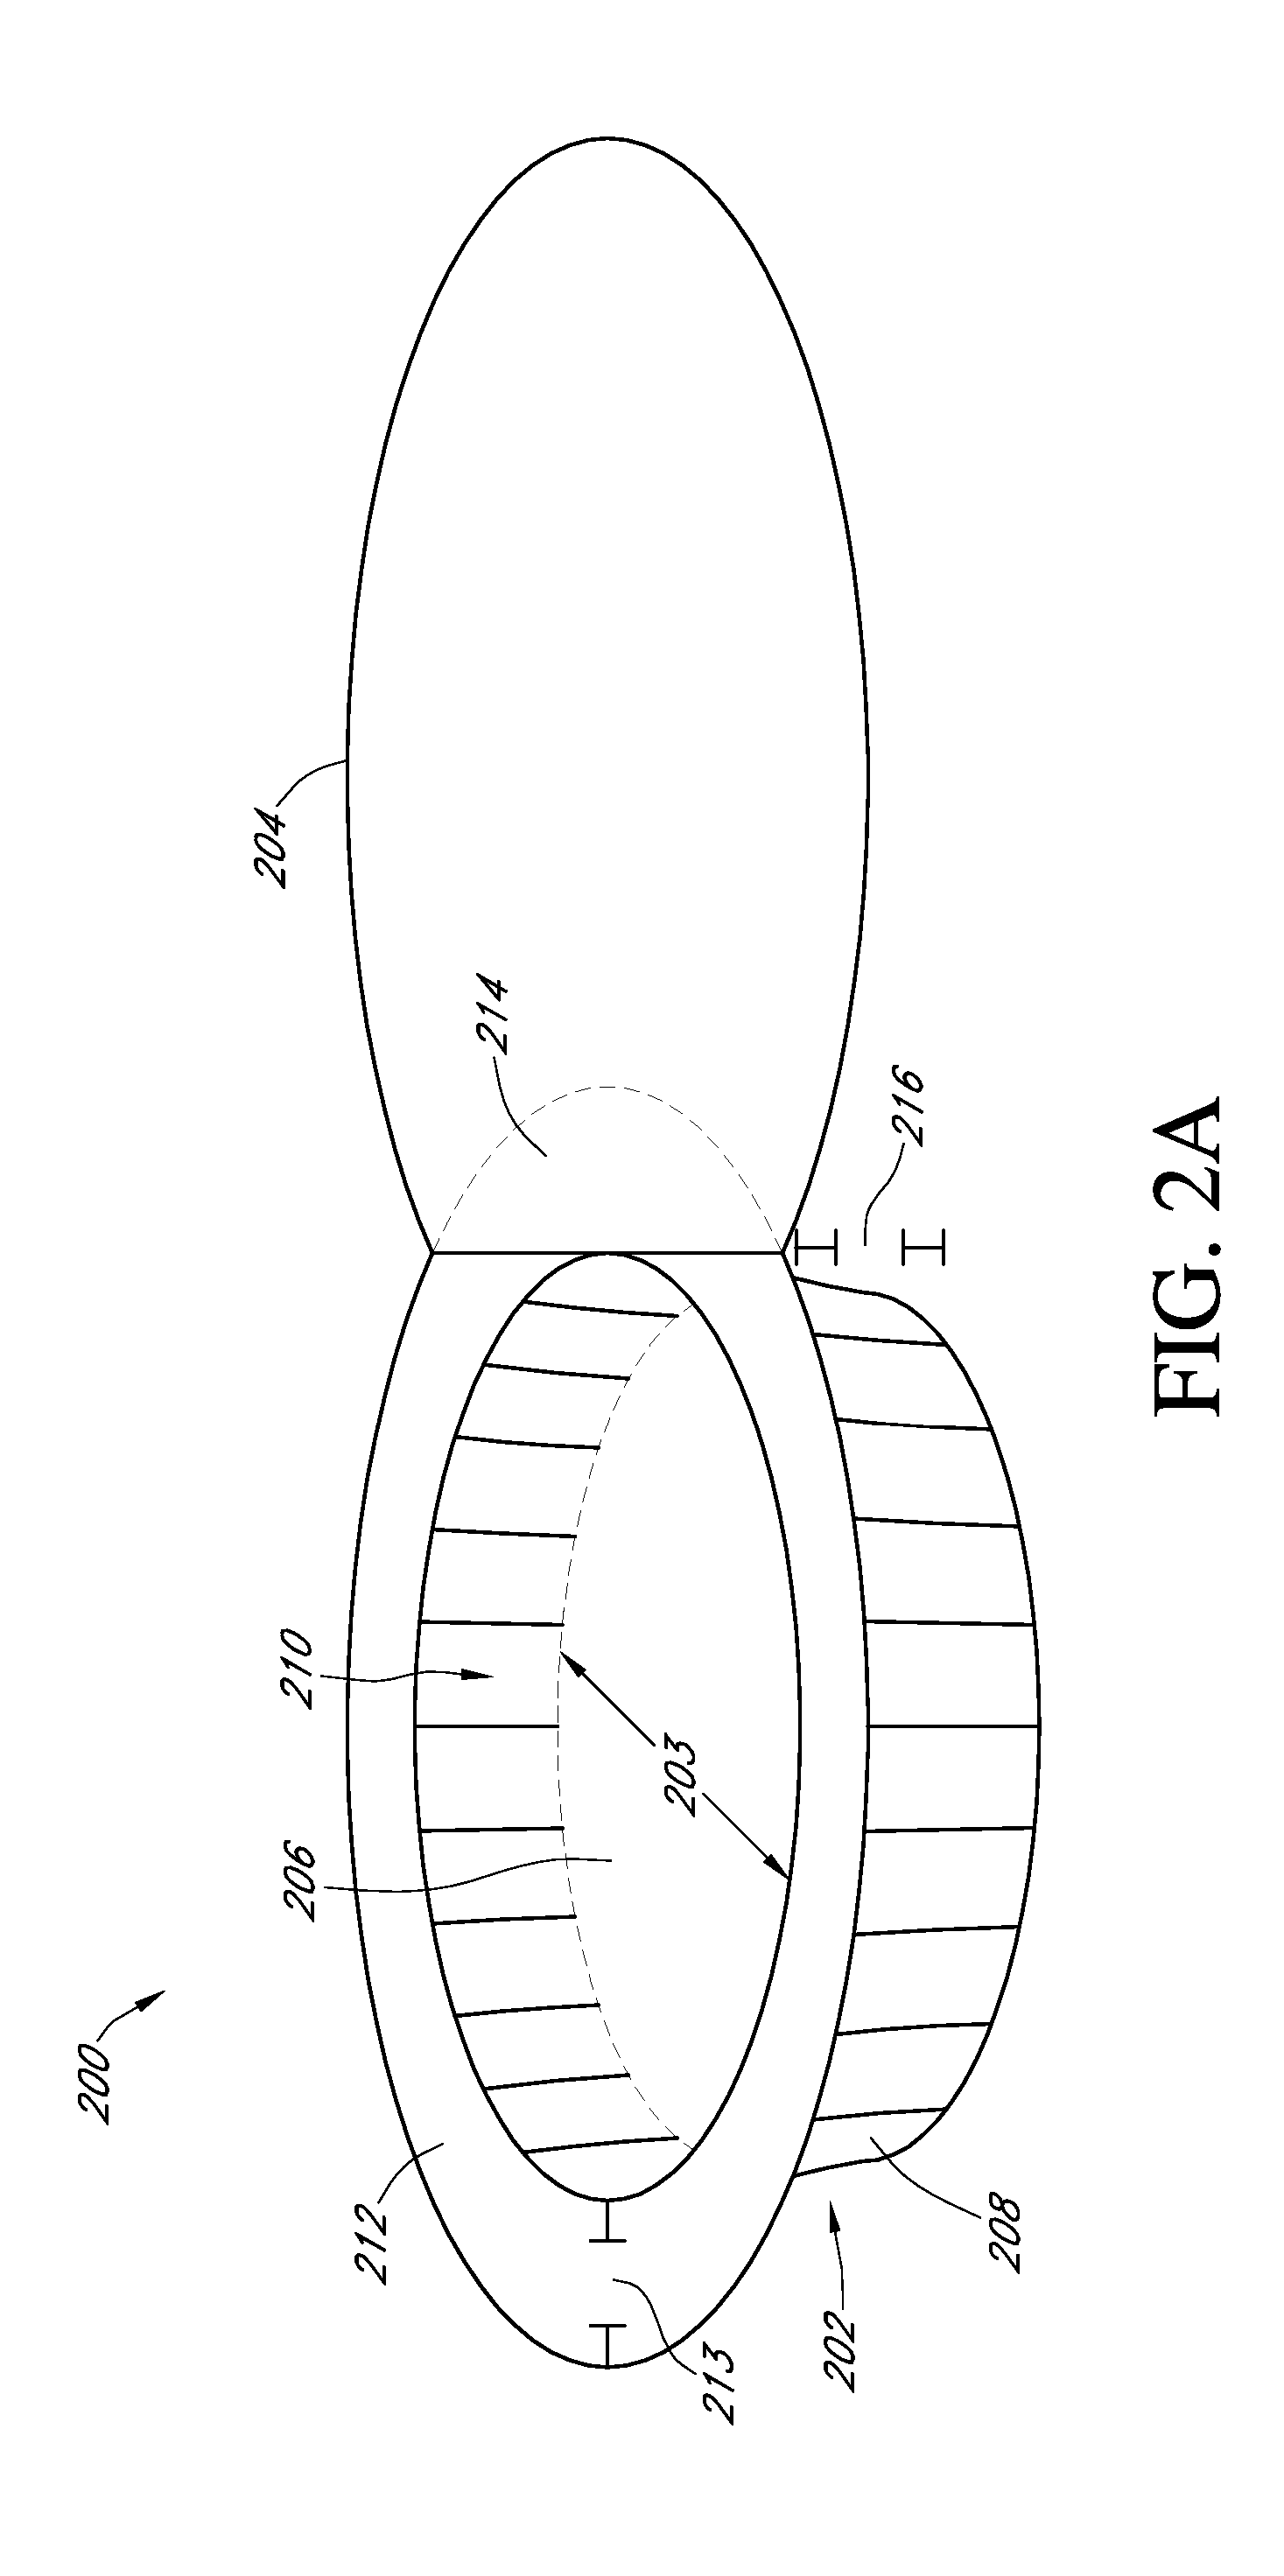 Systems and methods for forming pre-packaged brewing material